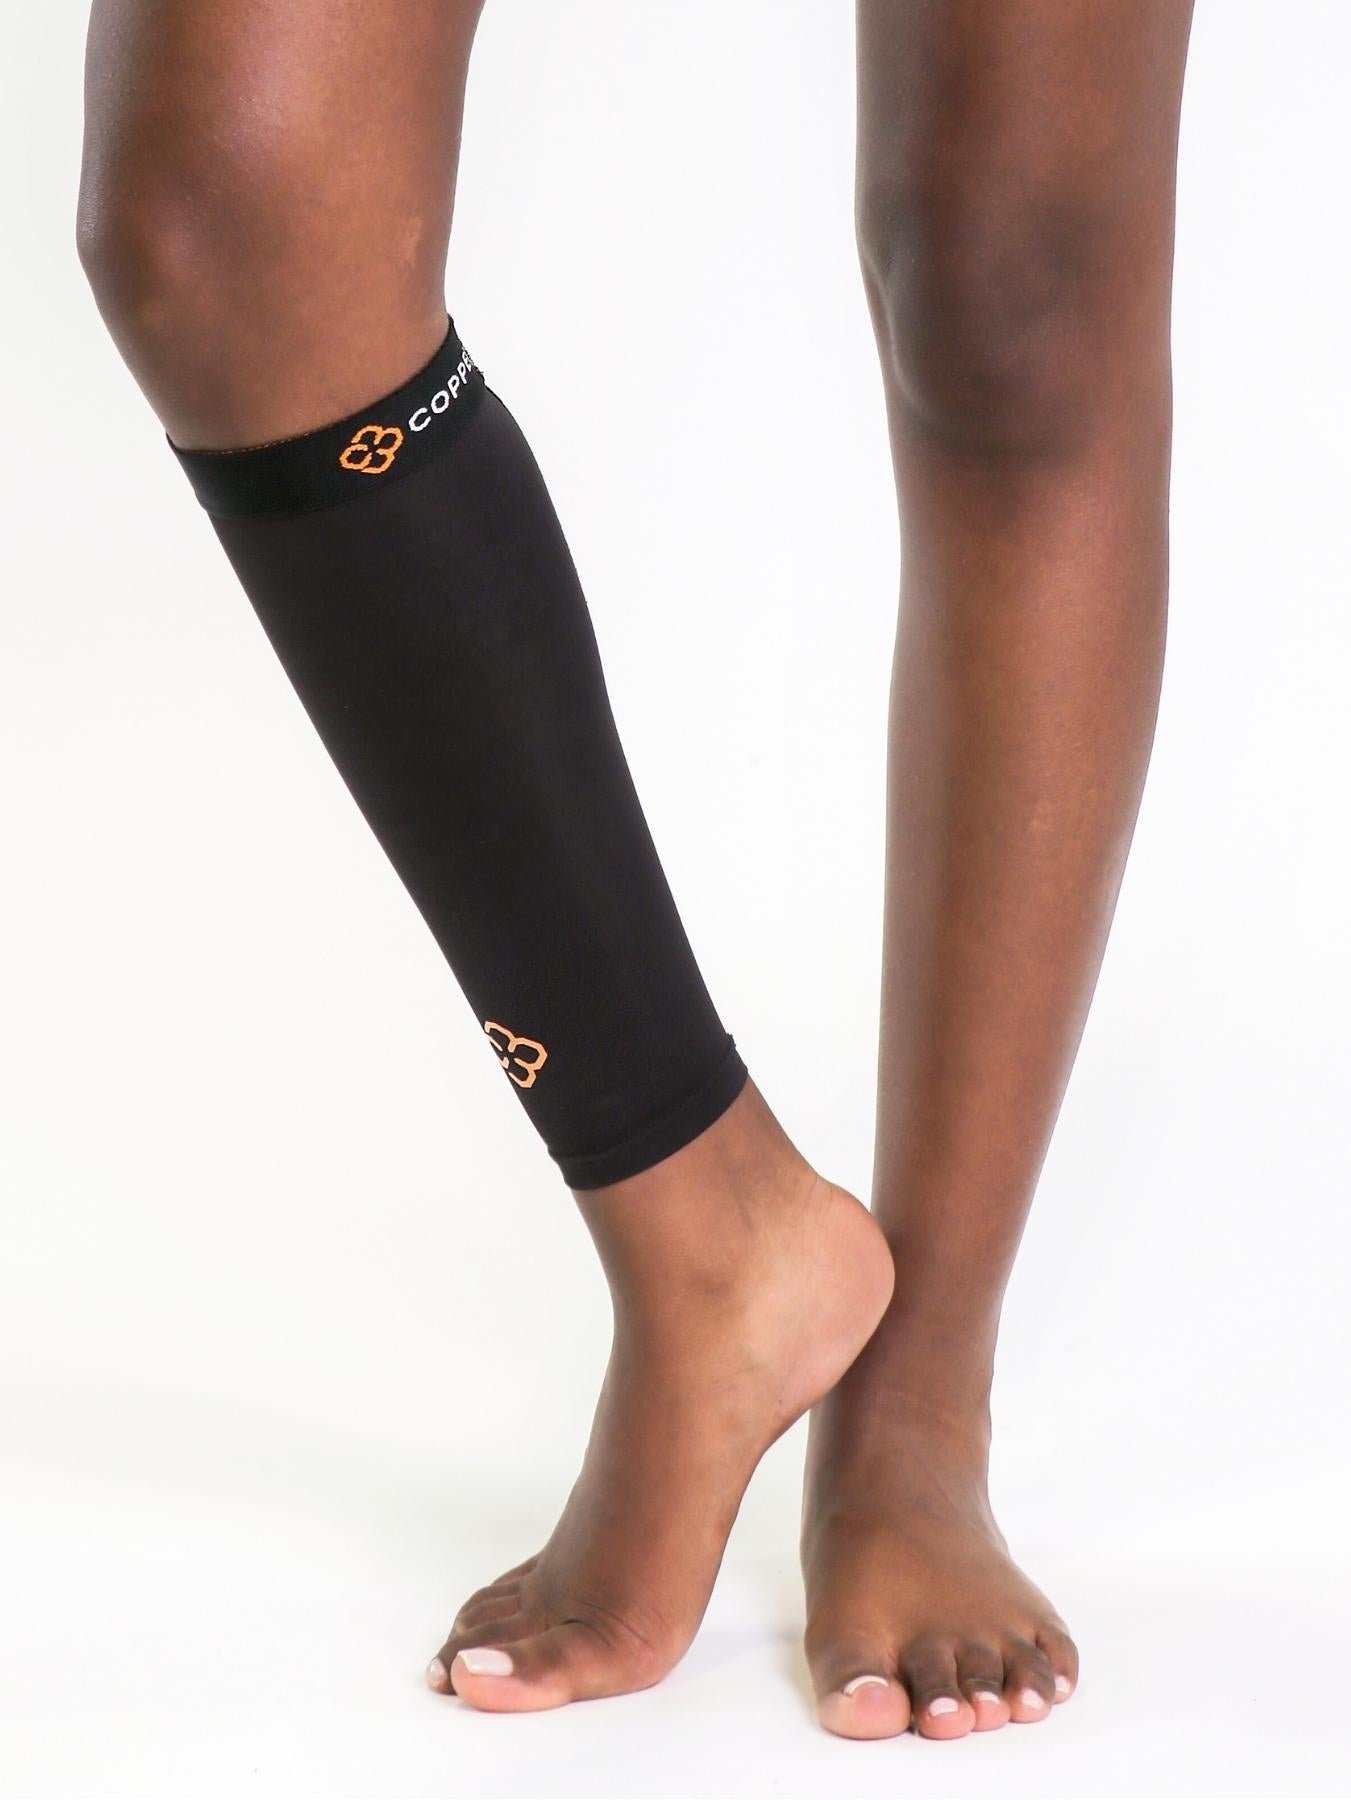  Copper Fit Unisex Adult Copper Infused Compression Calf Sleeves  Bandana, Black, Small Medium US : Health & Household